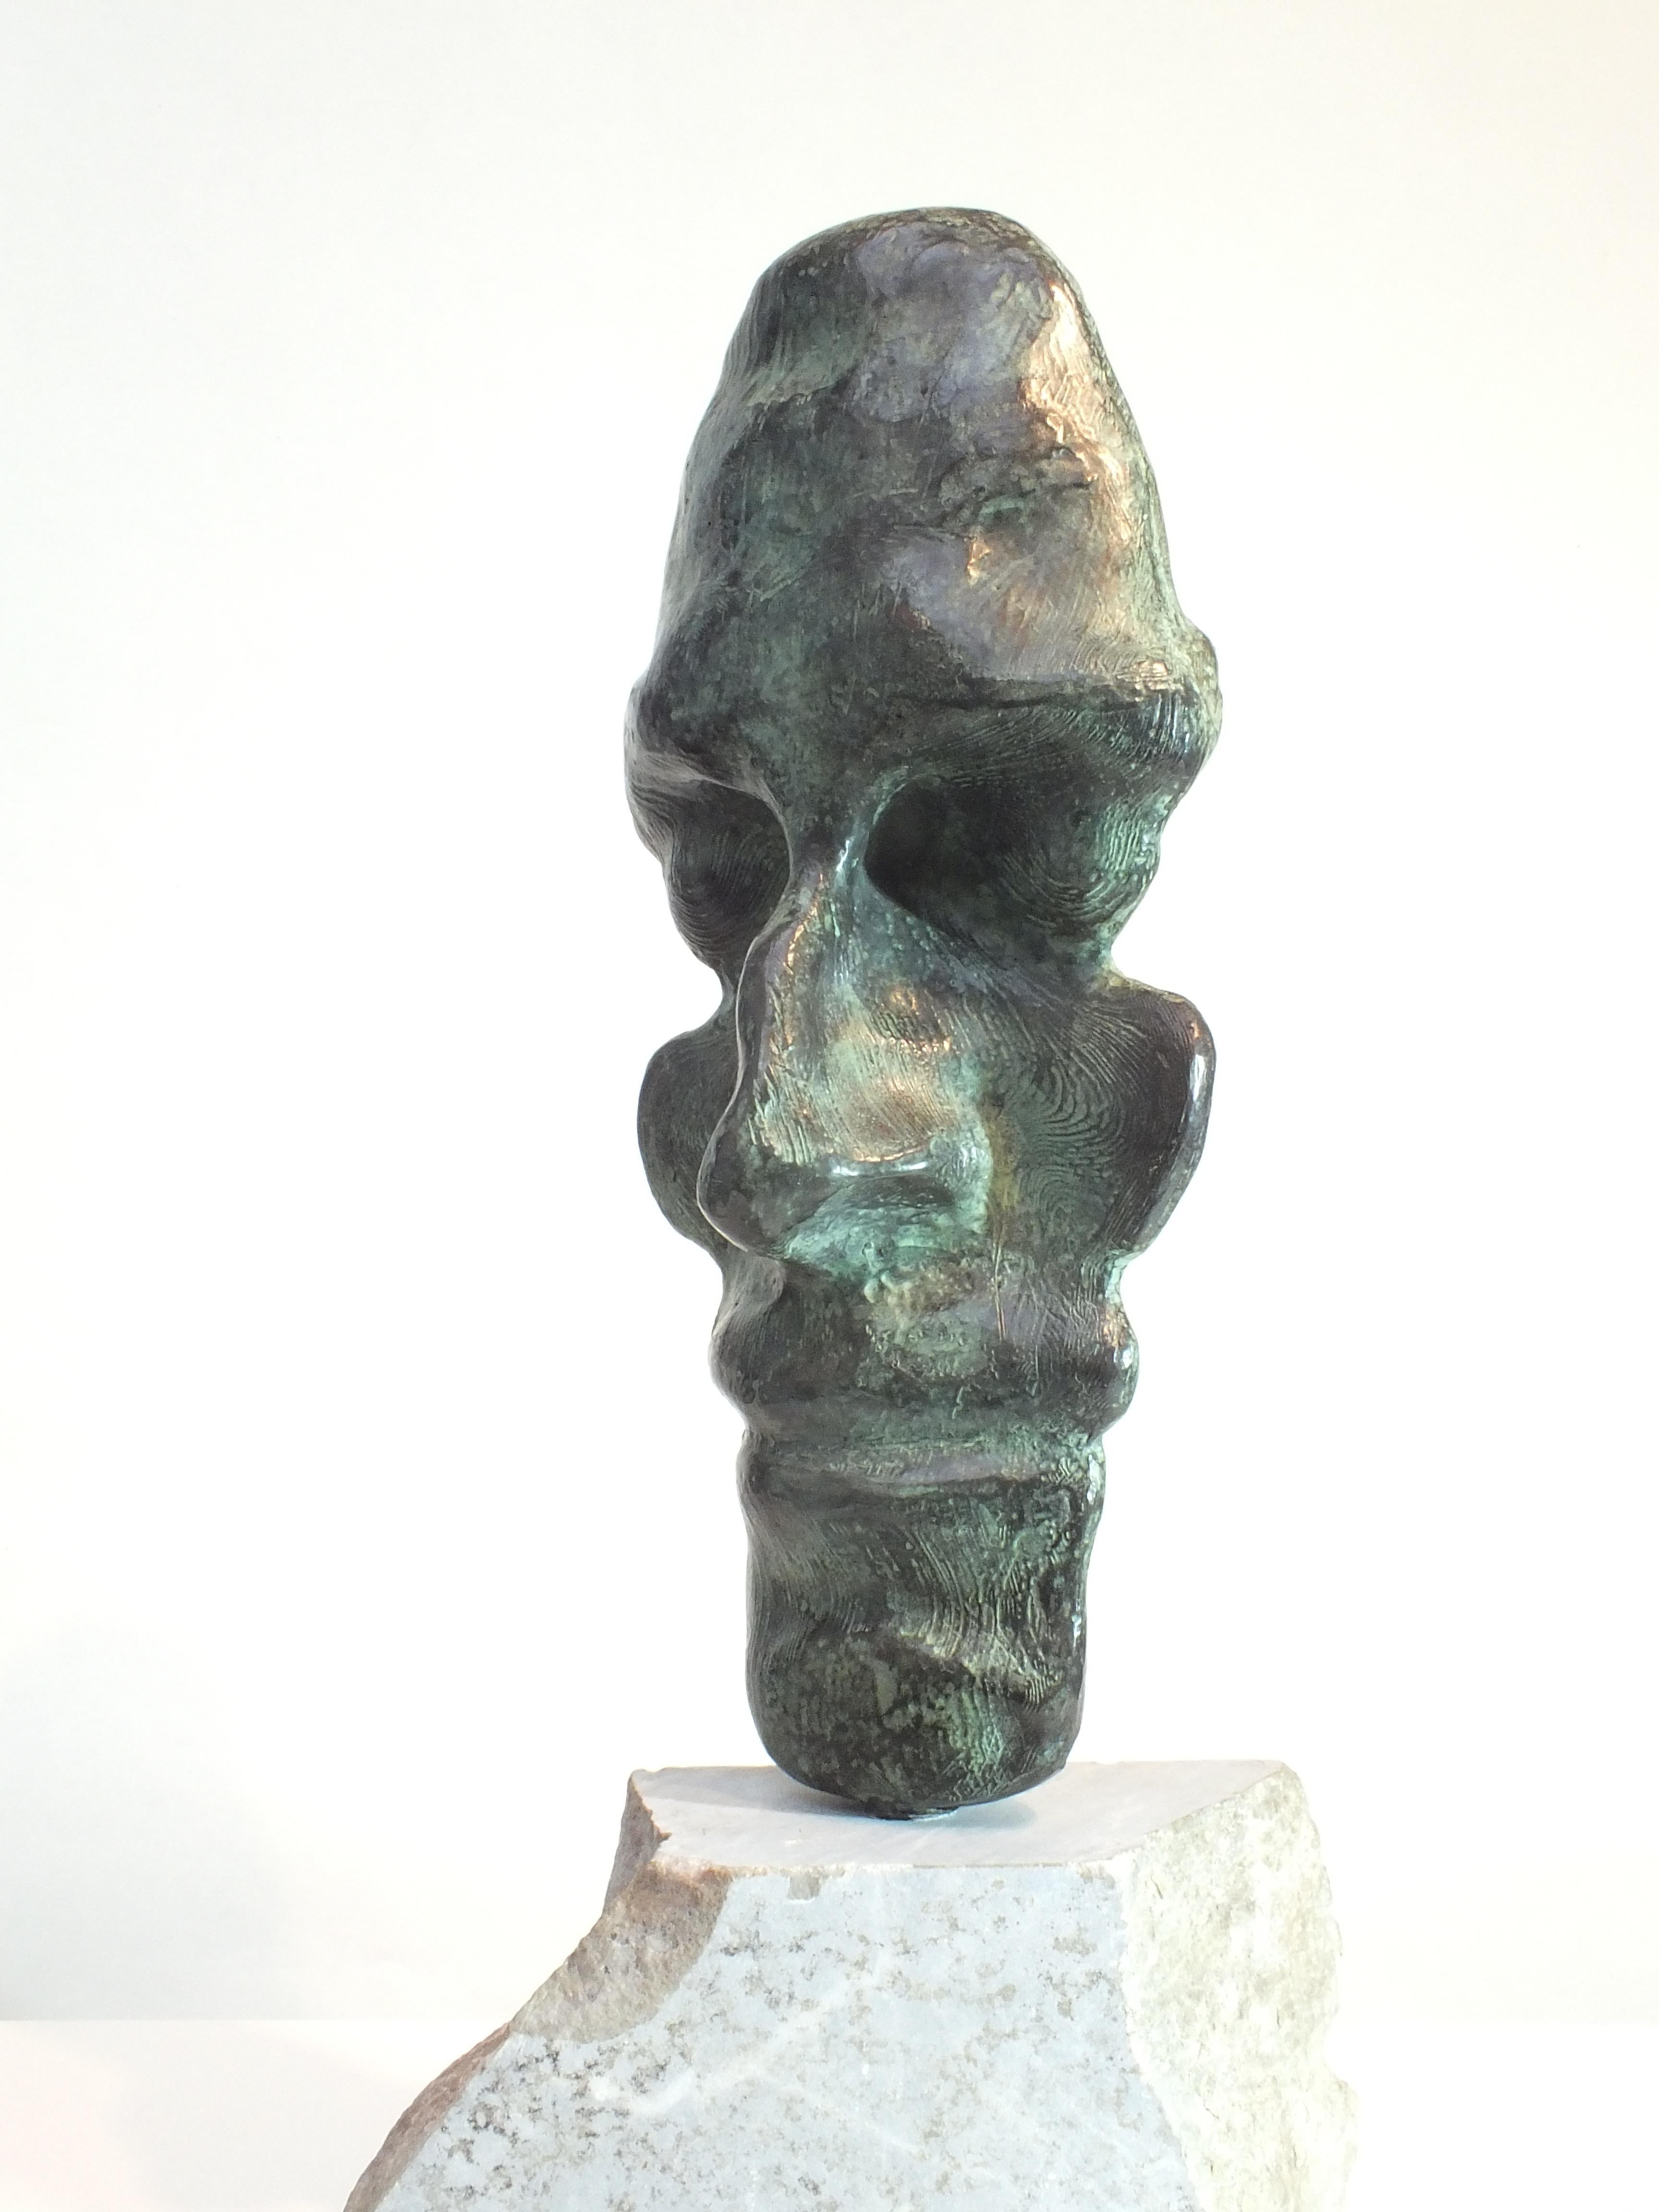 This unique, substantial bronze sculpture by Tim Rawlins is simply beautiful. The artist has used his artistic vision to create a piece that is a spiritual conundrum; do we face forward or do we face away or do we witness all around? The statue is